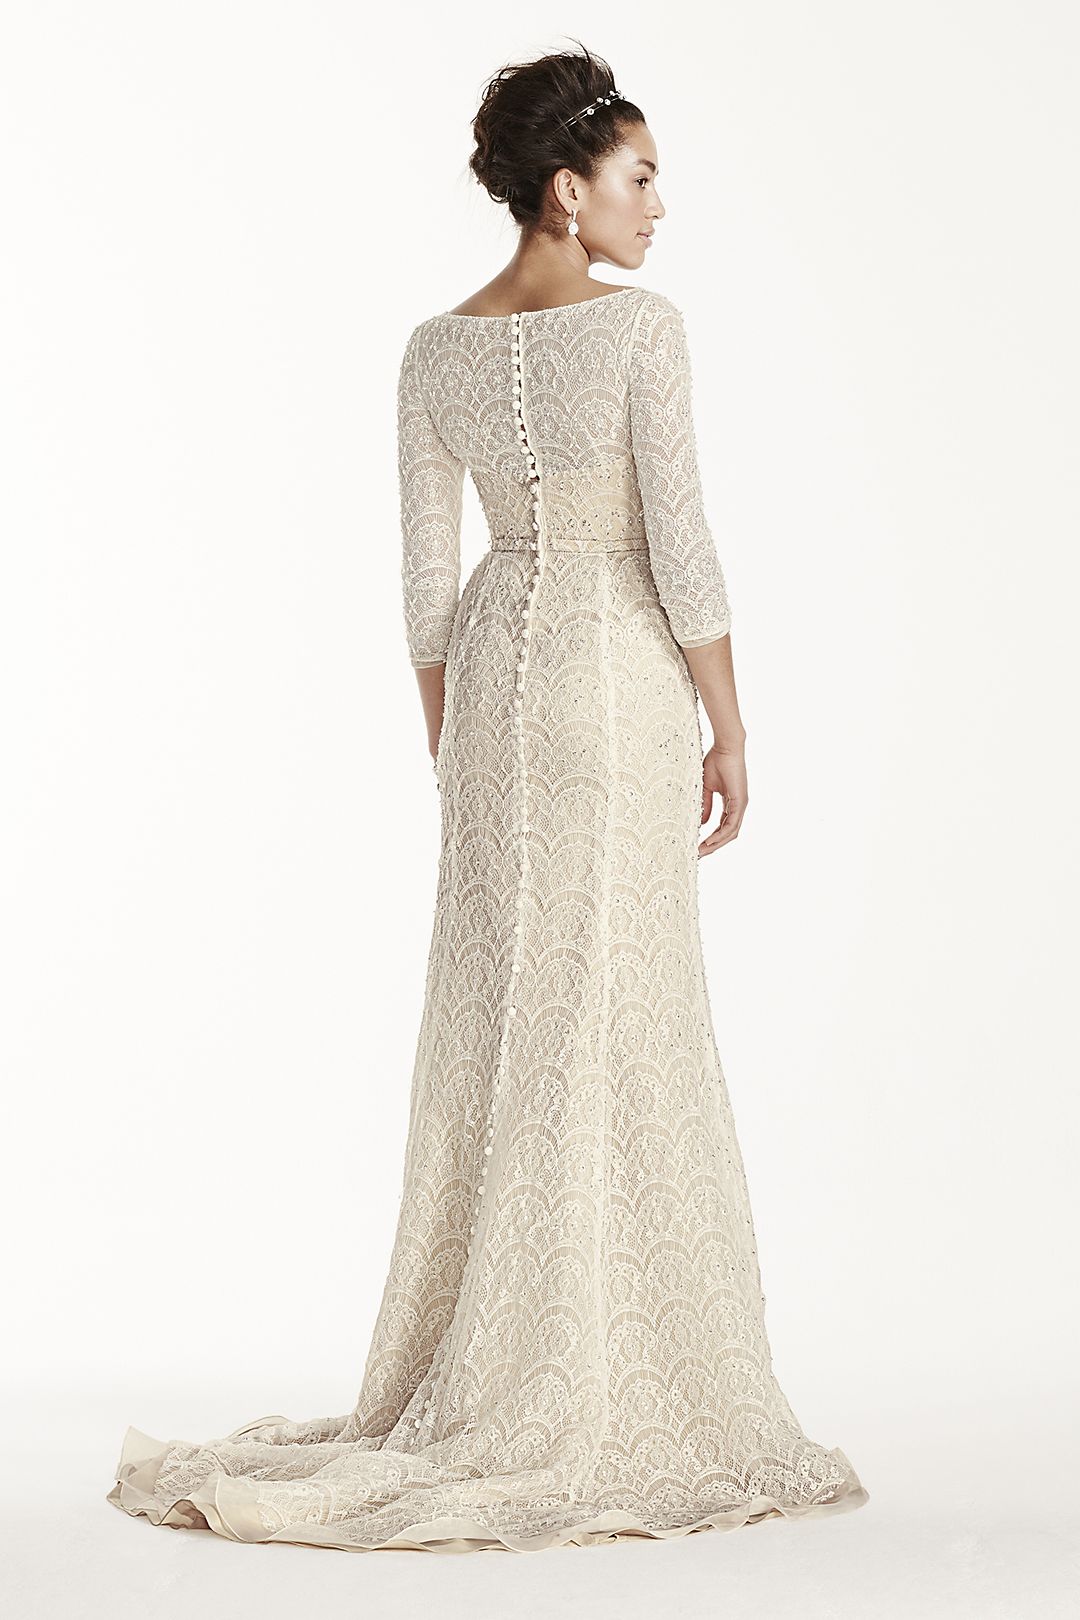 As-Is Beaded Lace 3/4 Sleeved Wedding Dress  Image 2